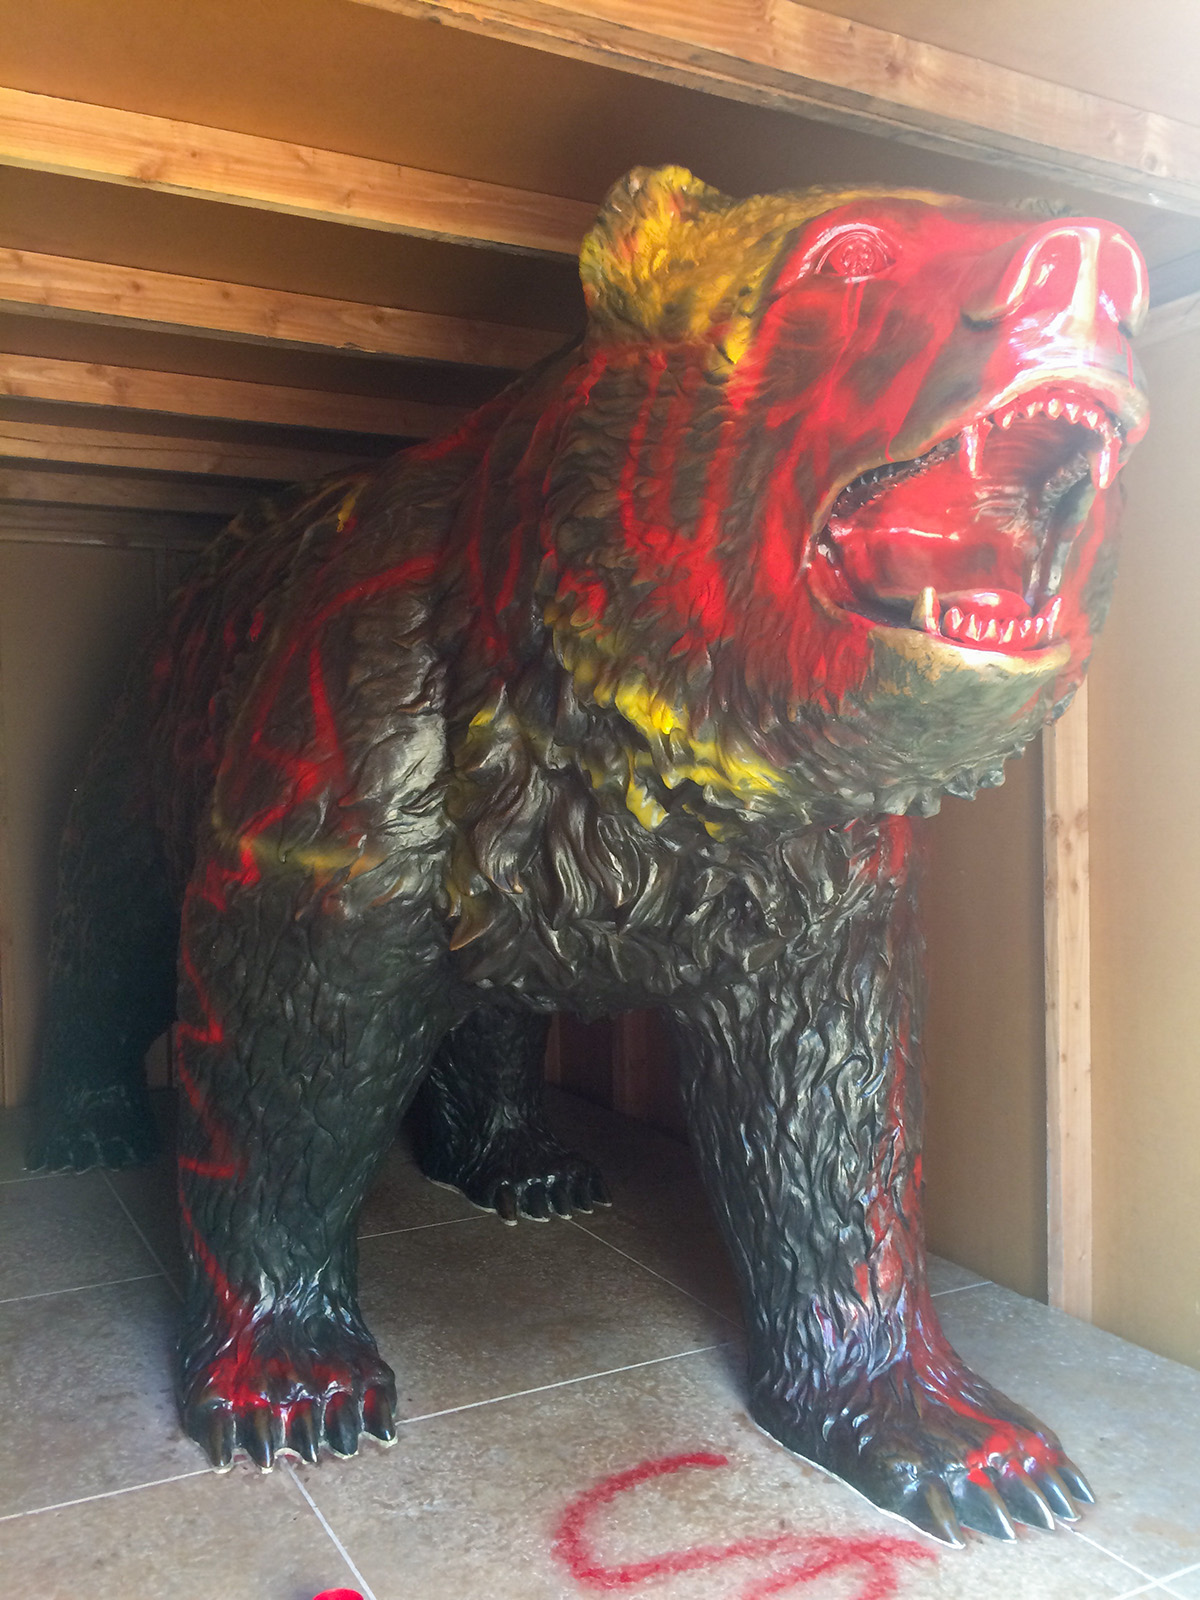 UCPD investigates vandalism after Bruin Bear found painted red